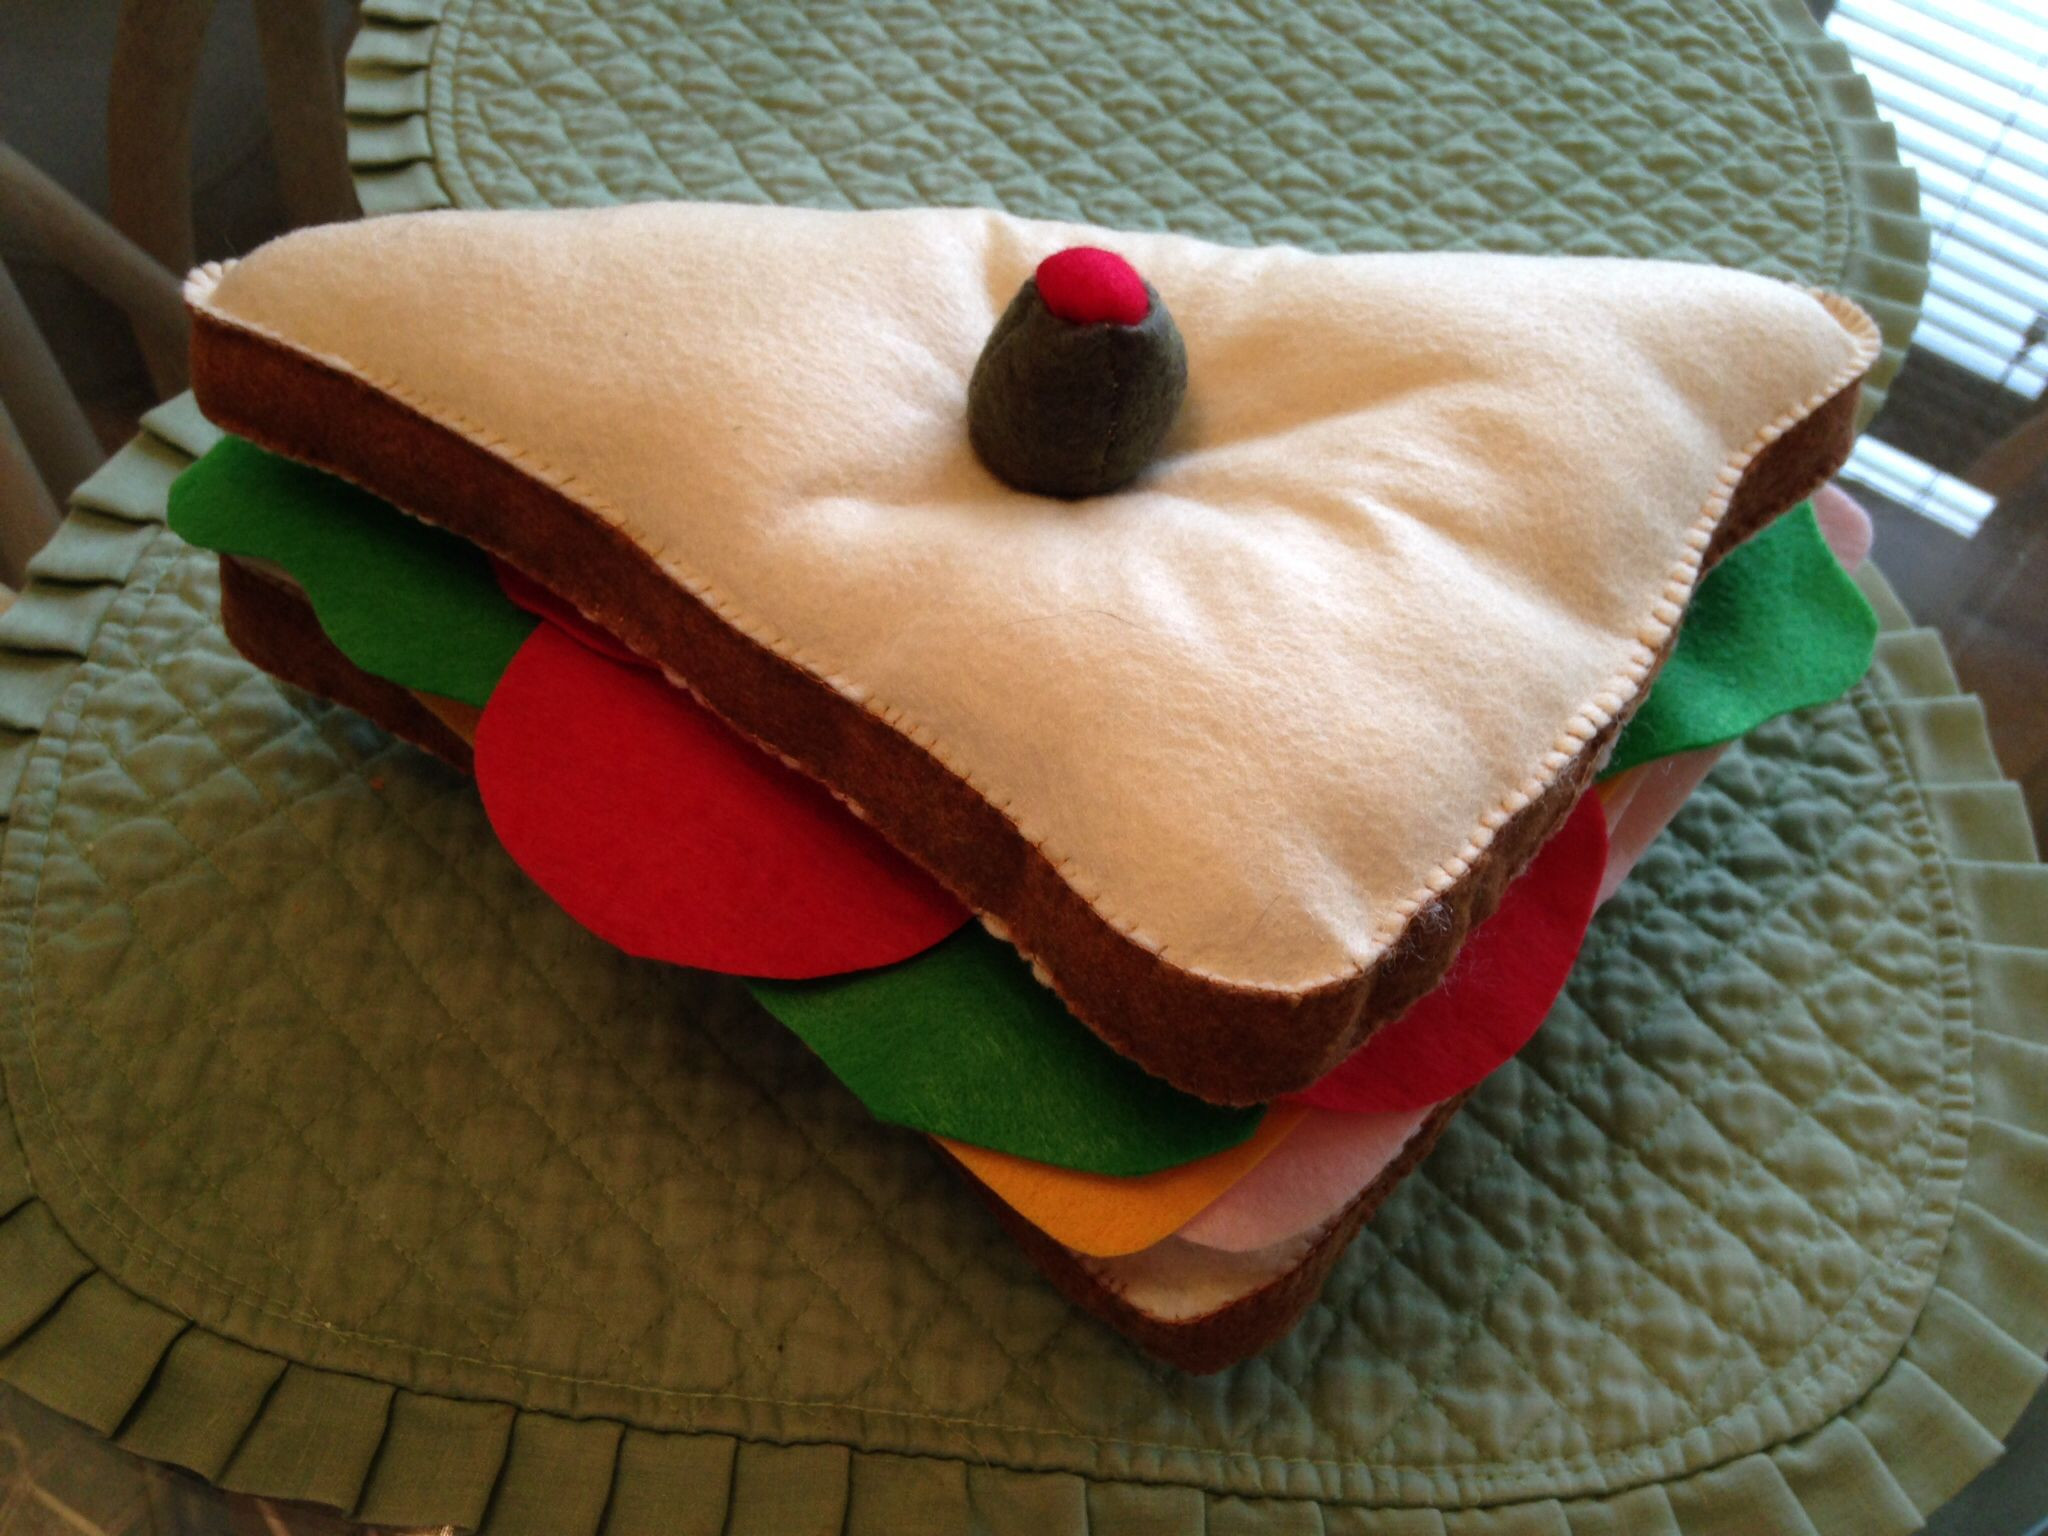 Team Fortress 2 Birthday Party Ideas
 TF2 Sandvich Plushie Made for Tristan s birthday